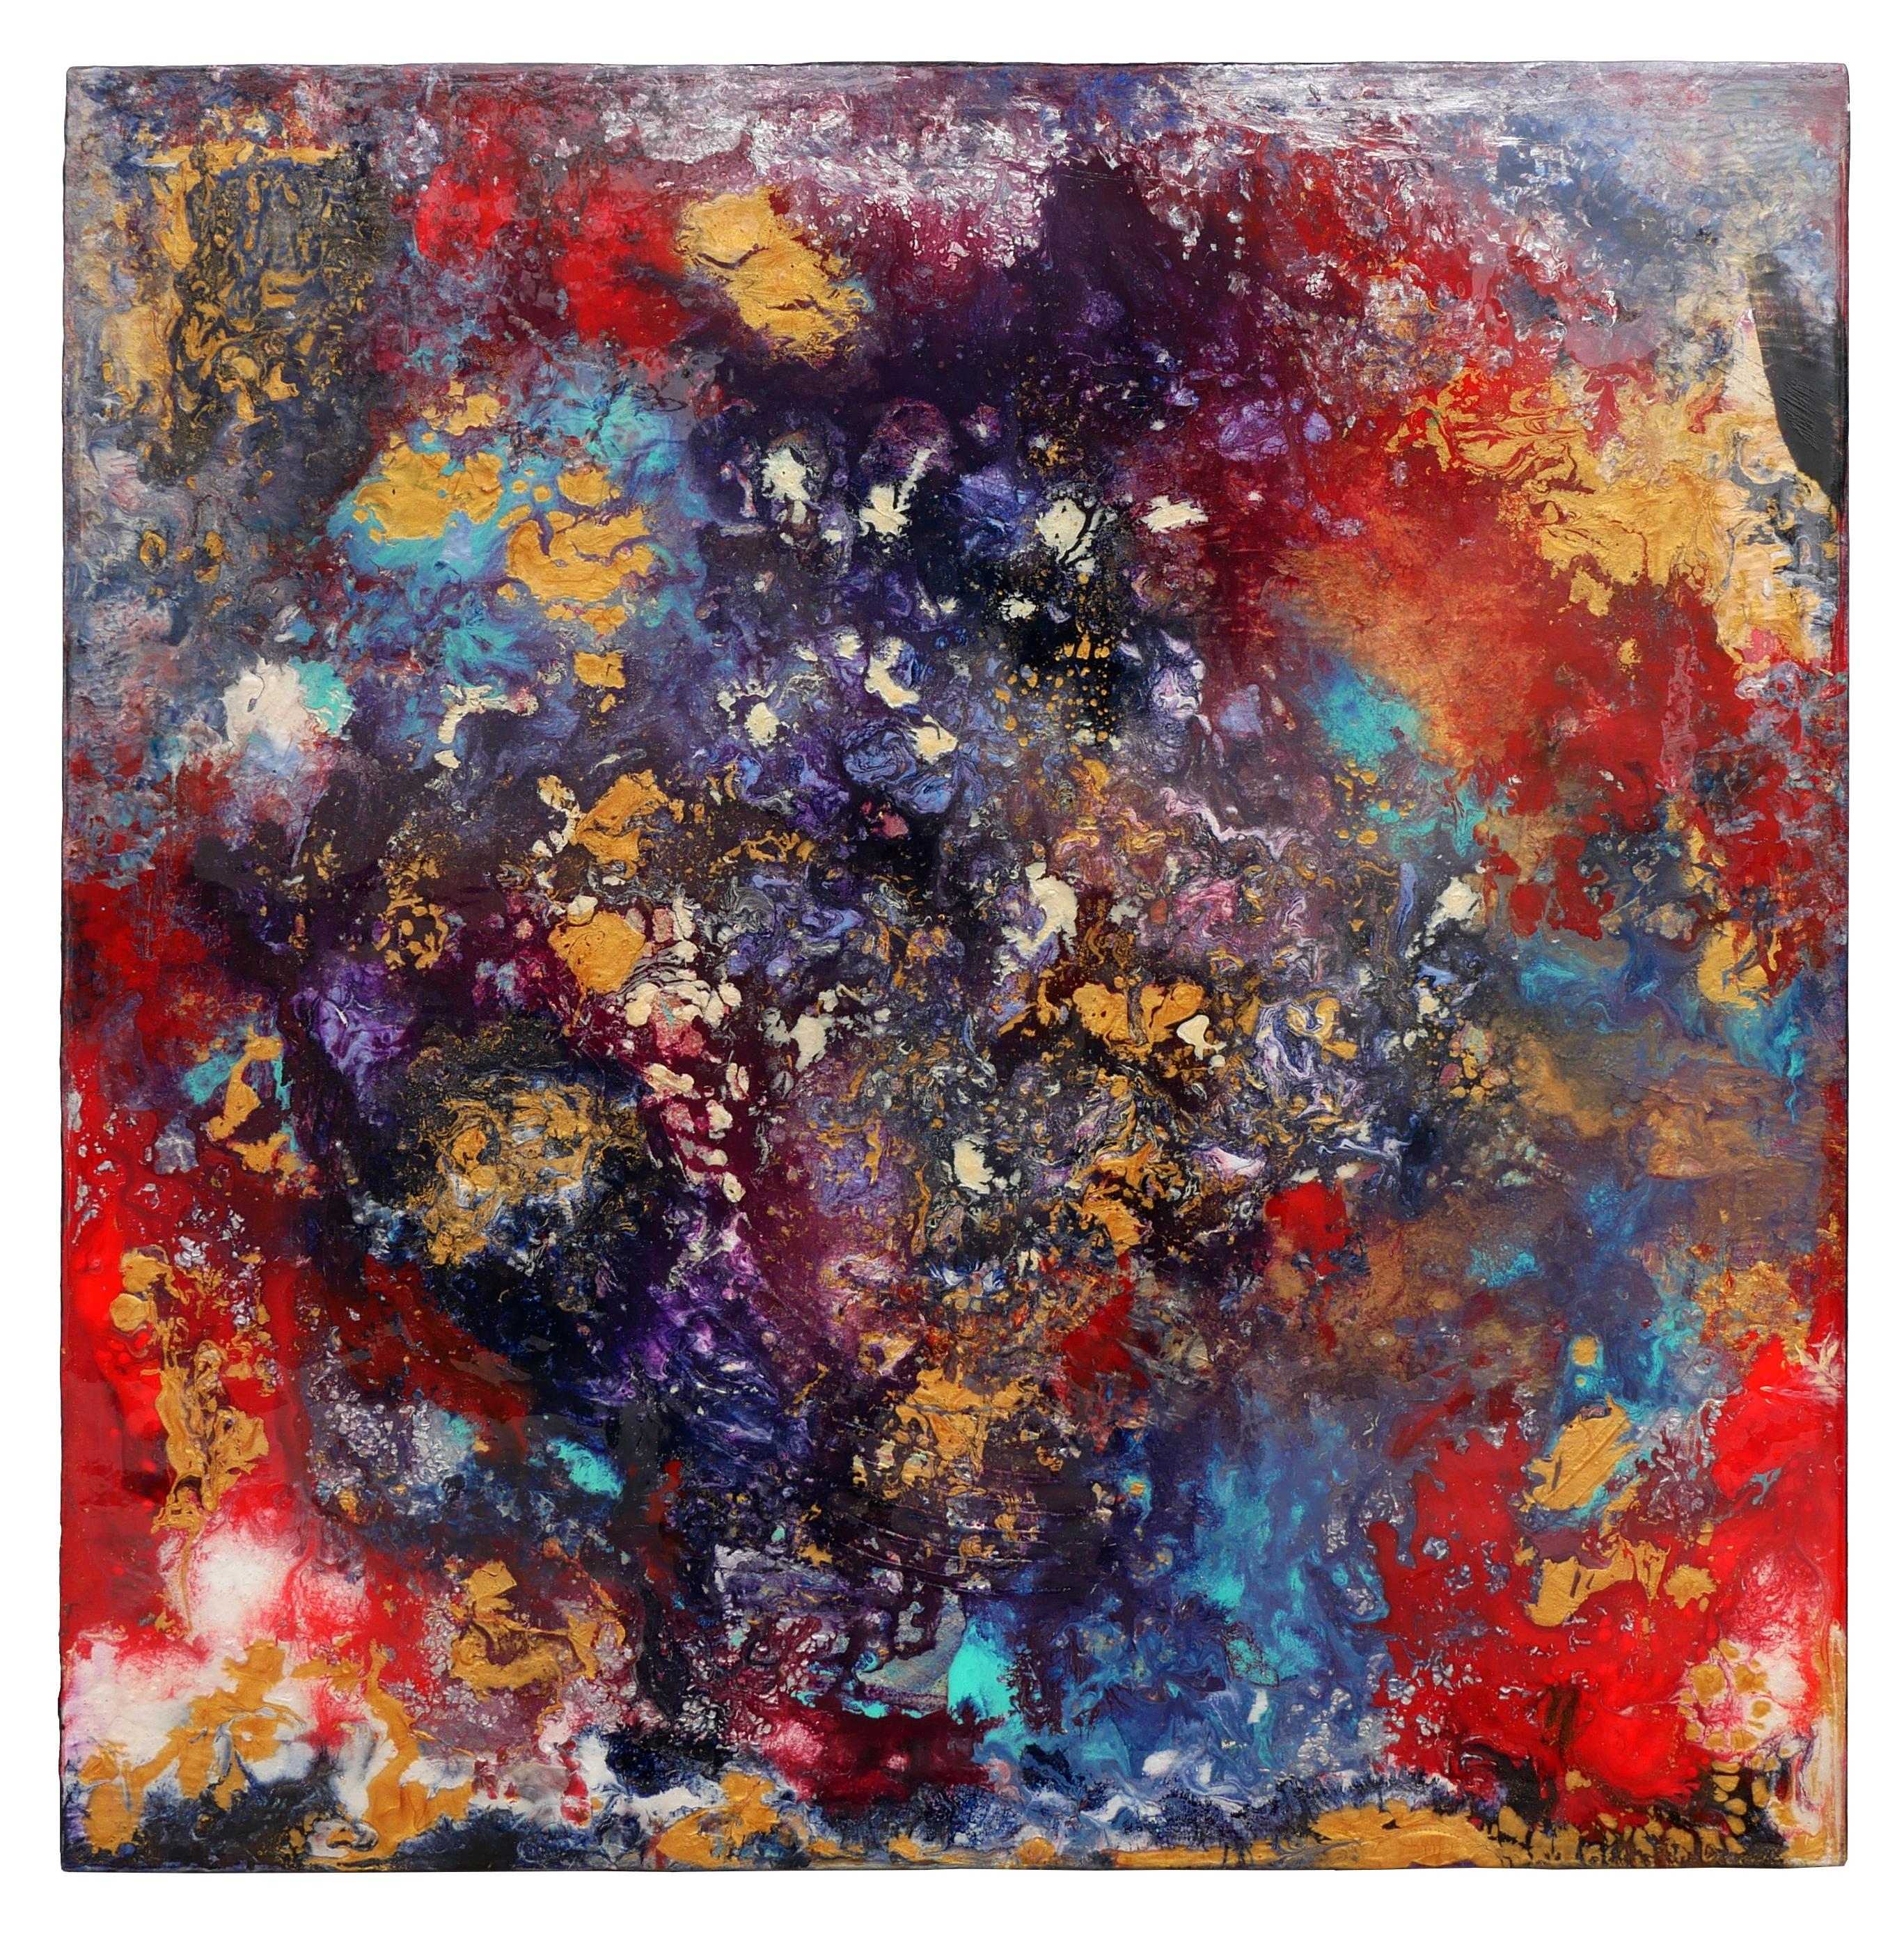 Barbara Rubenstein Abstract Painting - "Introspection" Vibrant Red, Purple, Blue and Gold Abstract Square Painting 